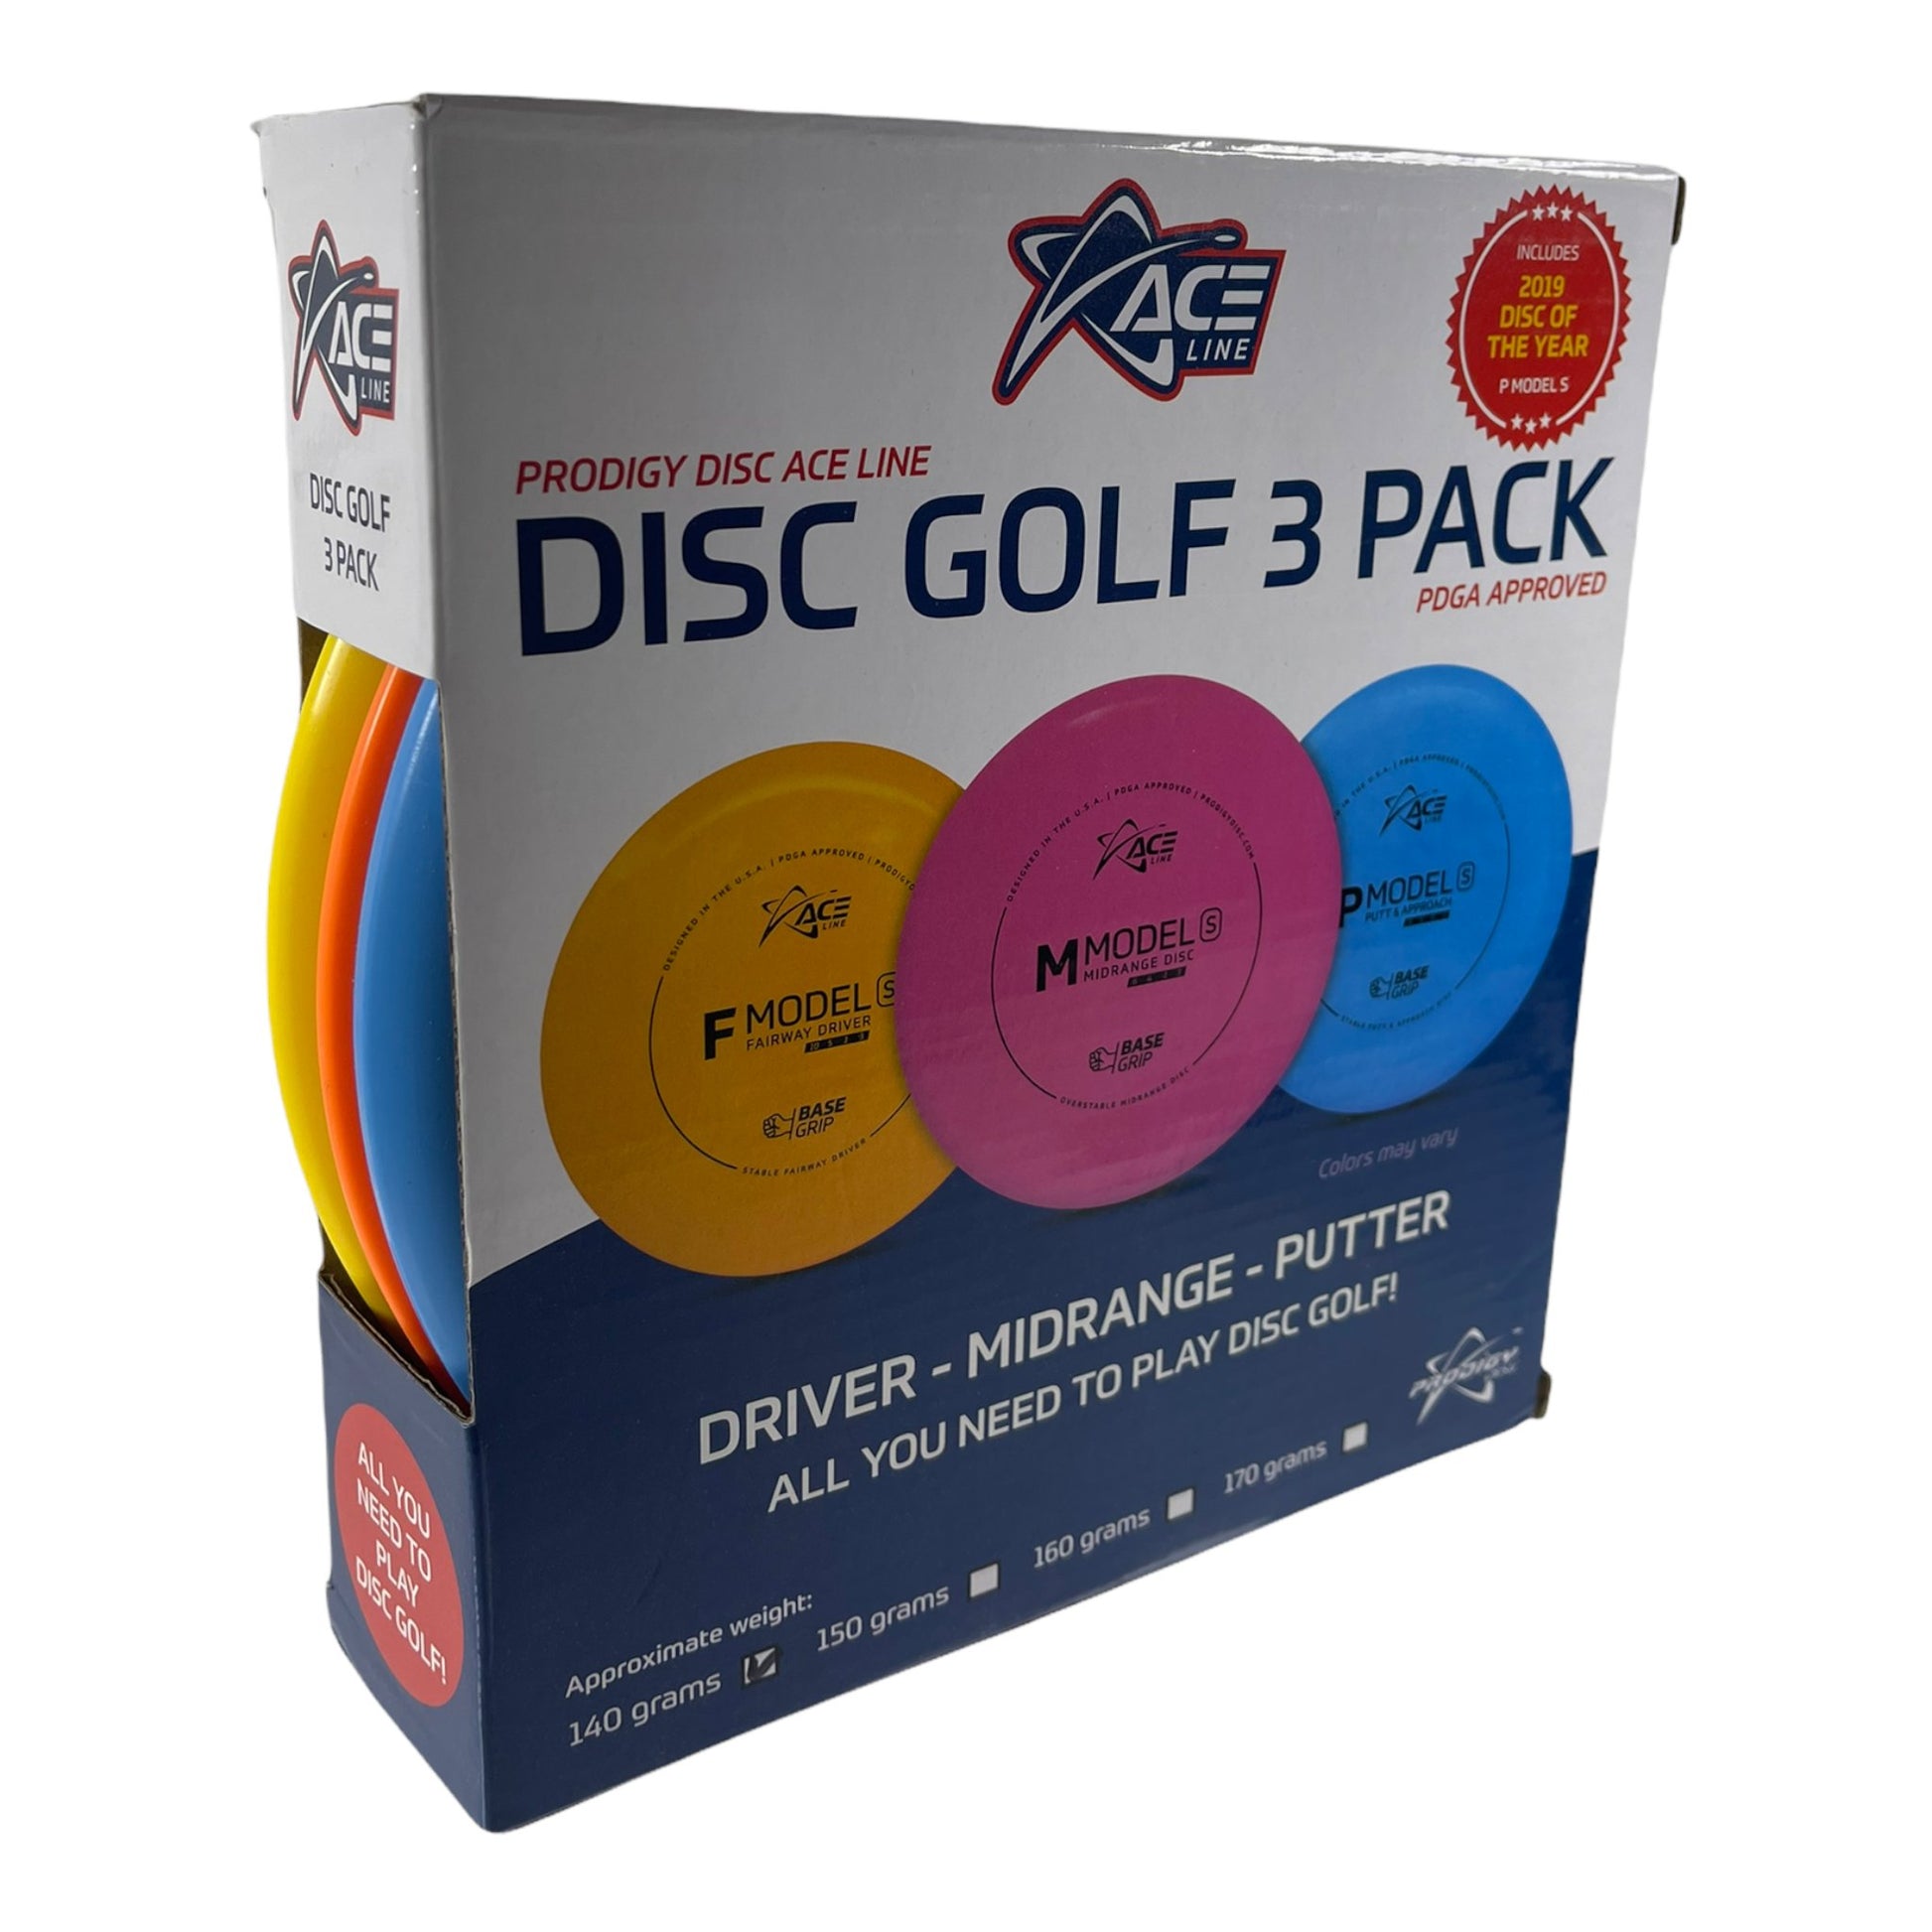 Prodigy Disc Prodigy Disc Golf 3 Pack | Ace Line (Lightweight)